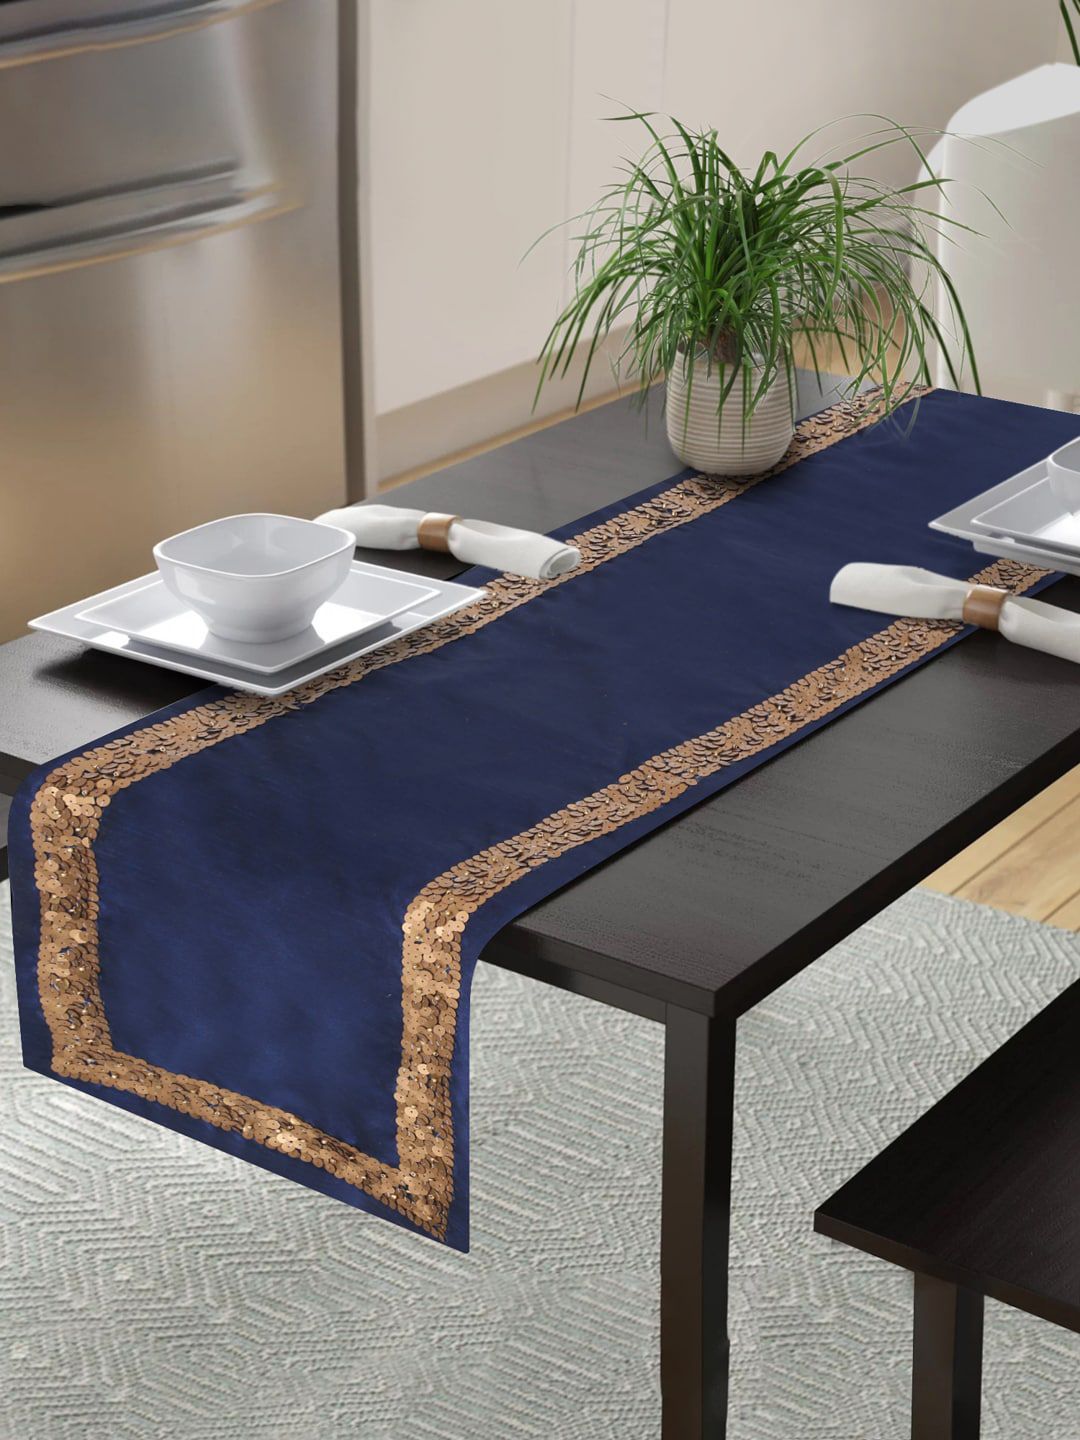 Alina decor Blue Embellished 6-Seater Table Runner Price in India